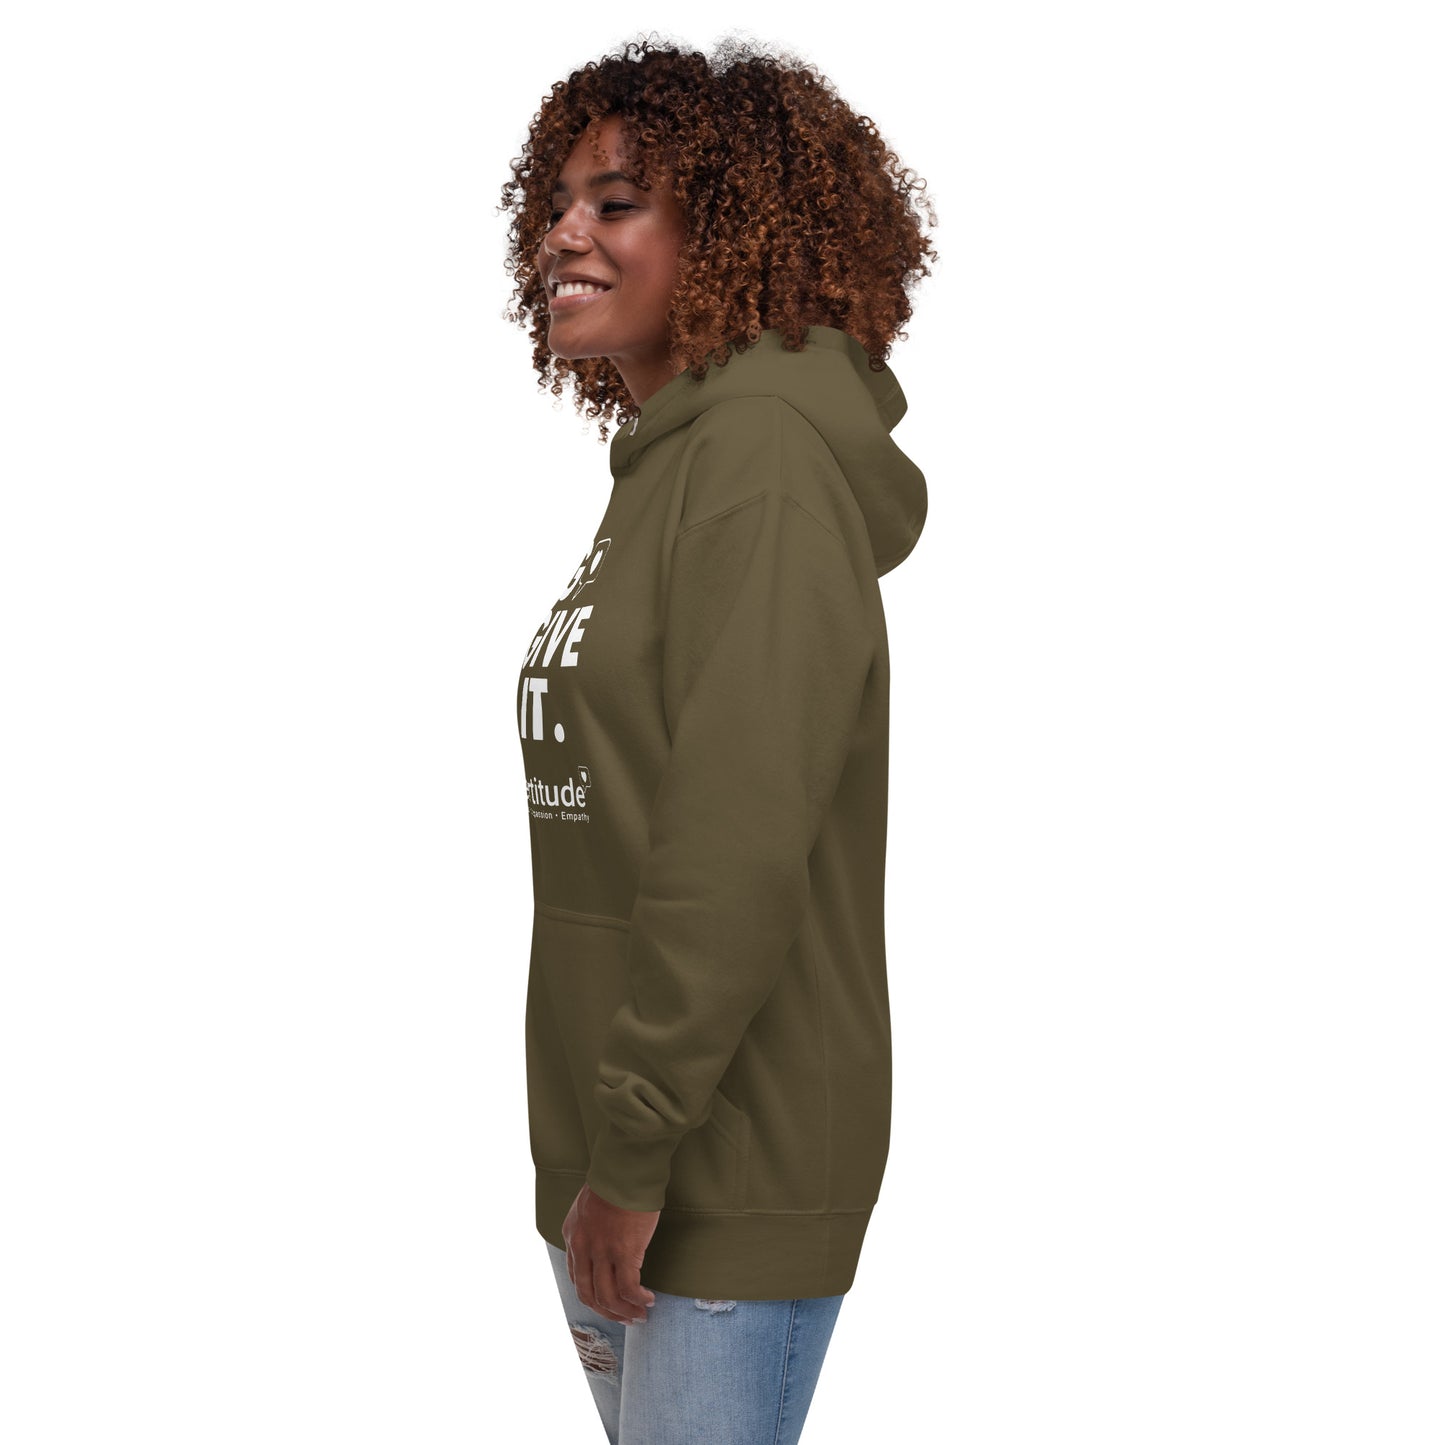 Go Give It Unisex Hoodie (50% to charity)